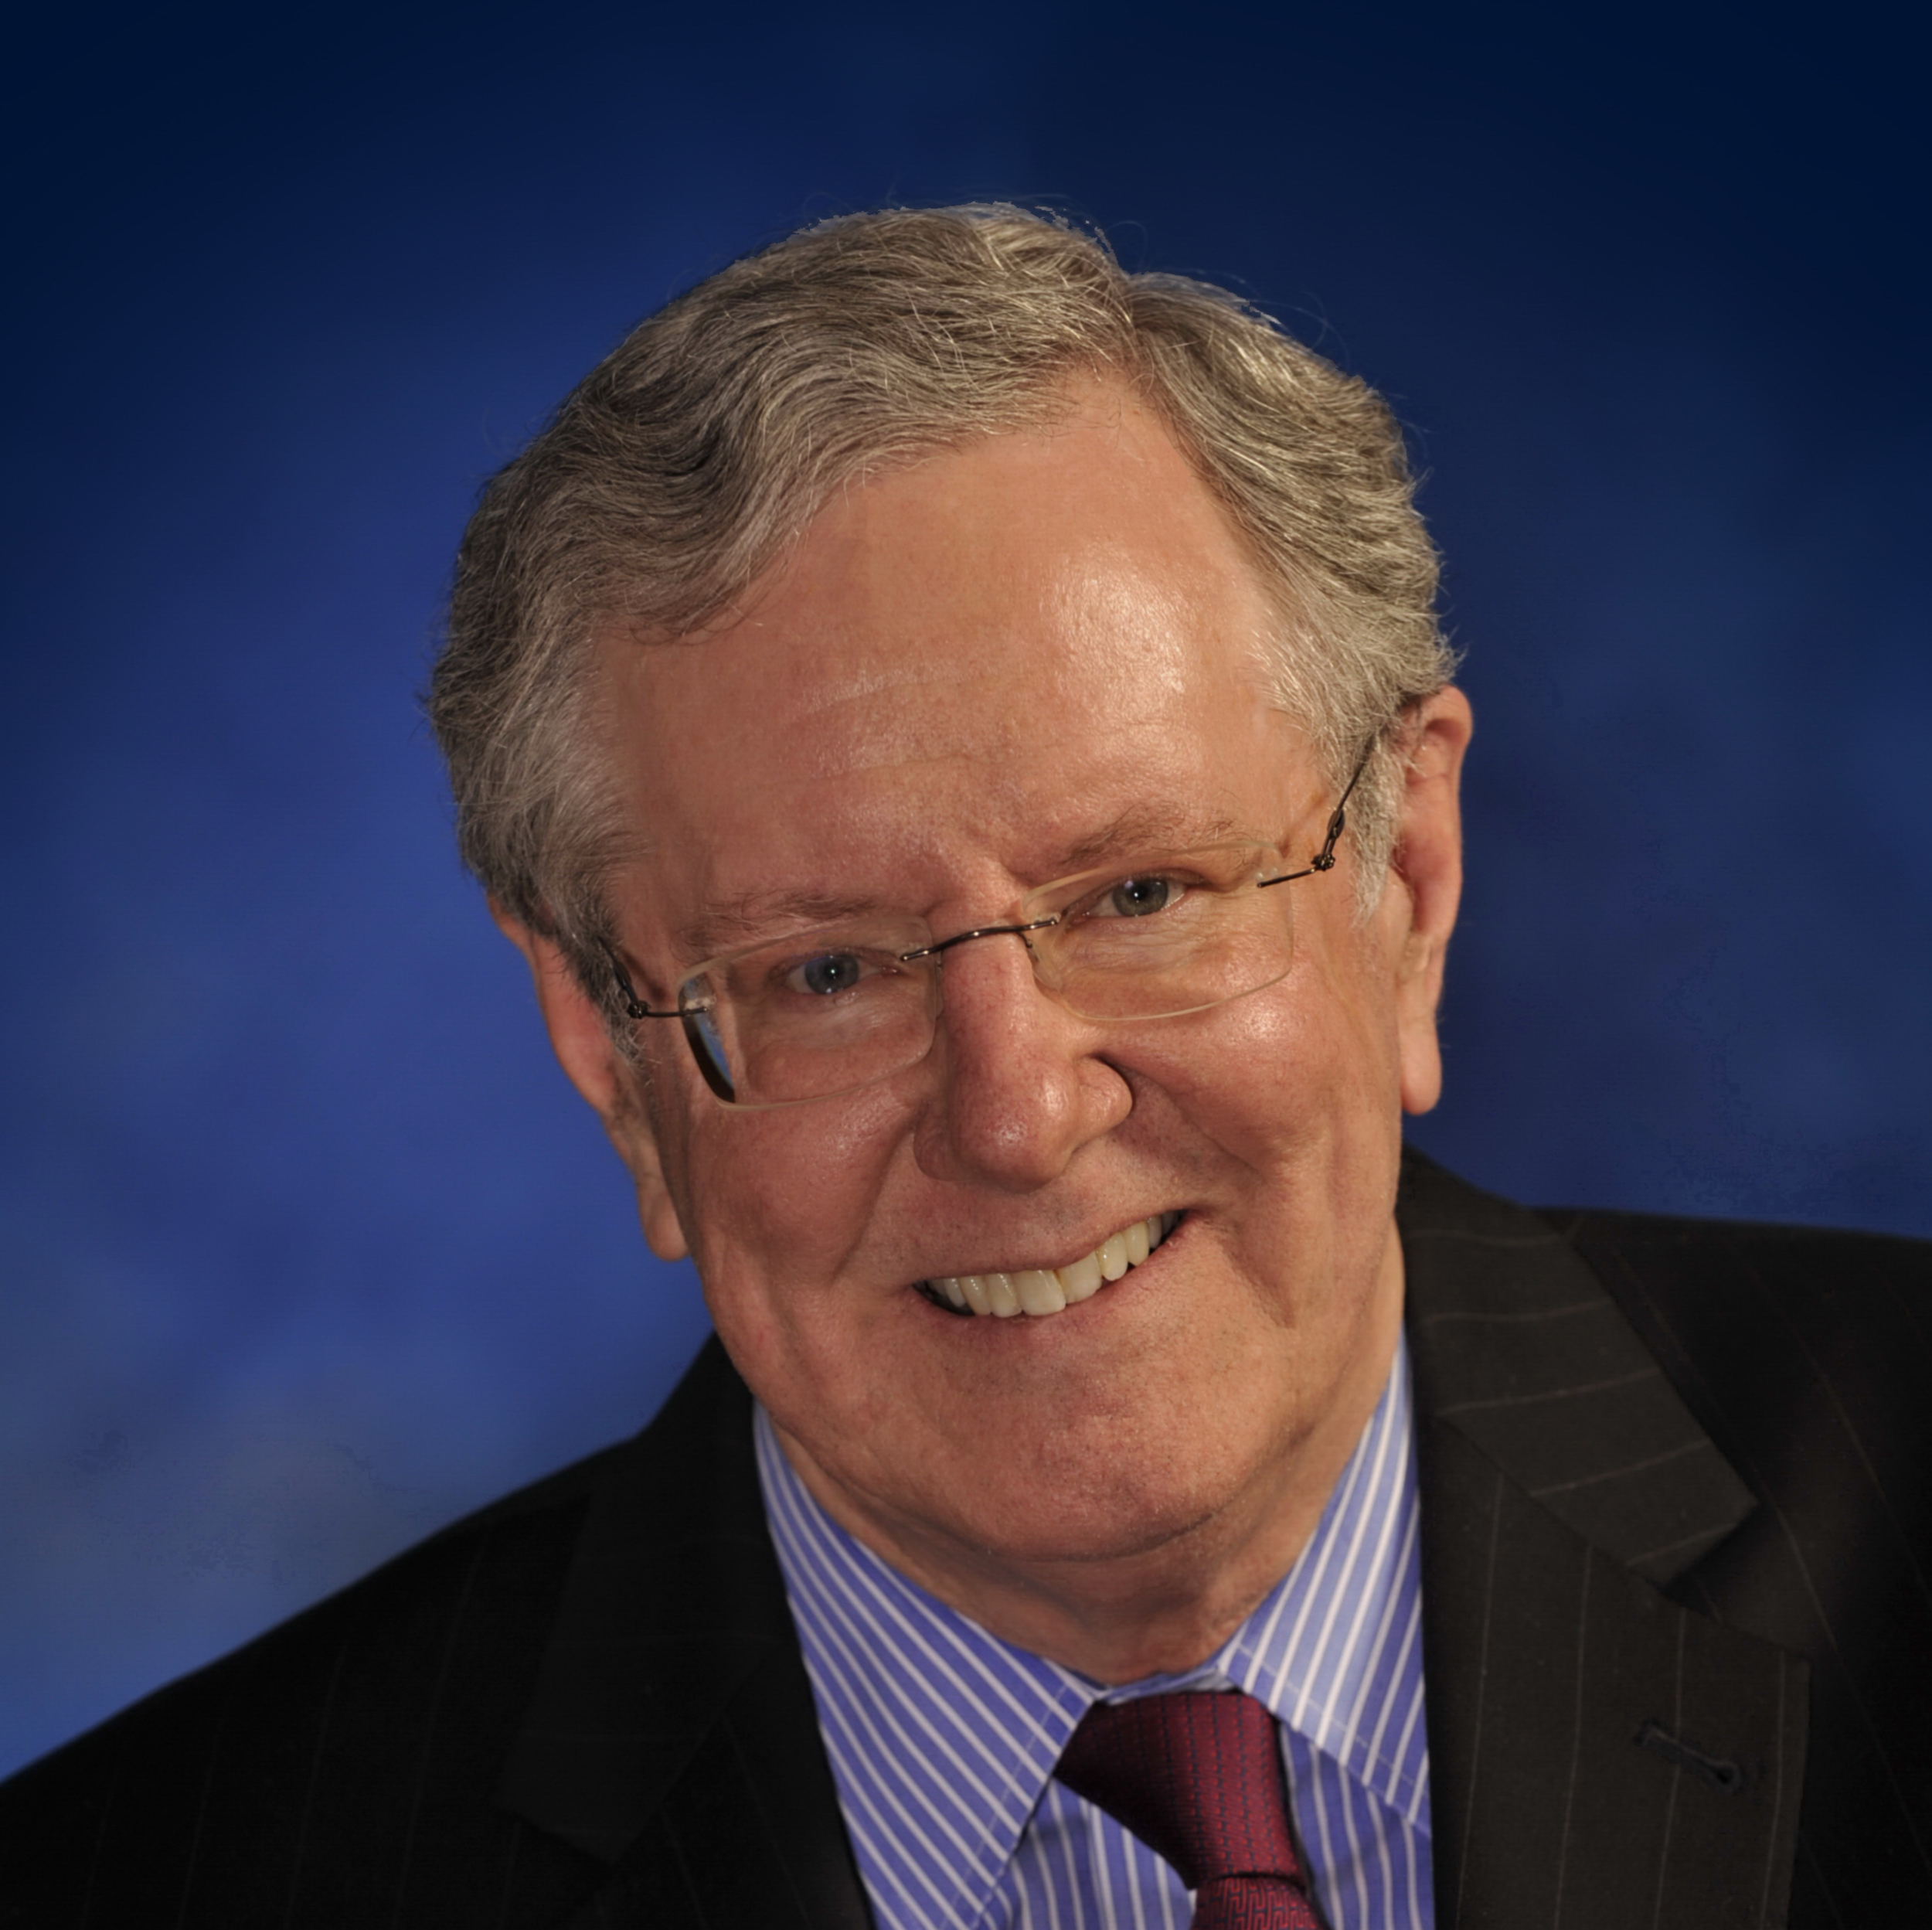 Steve Forbes - Editor and Chairman, Forbes Media